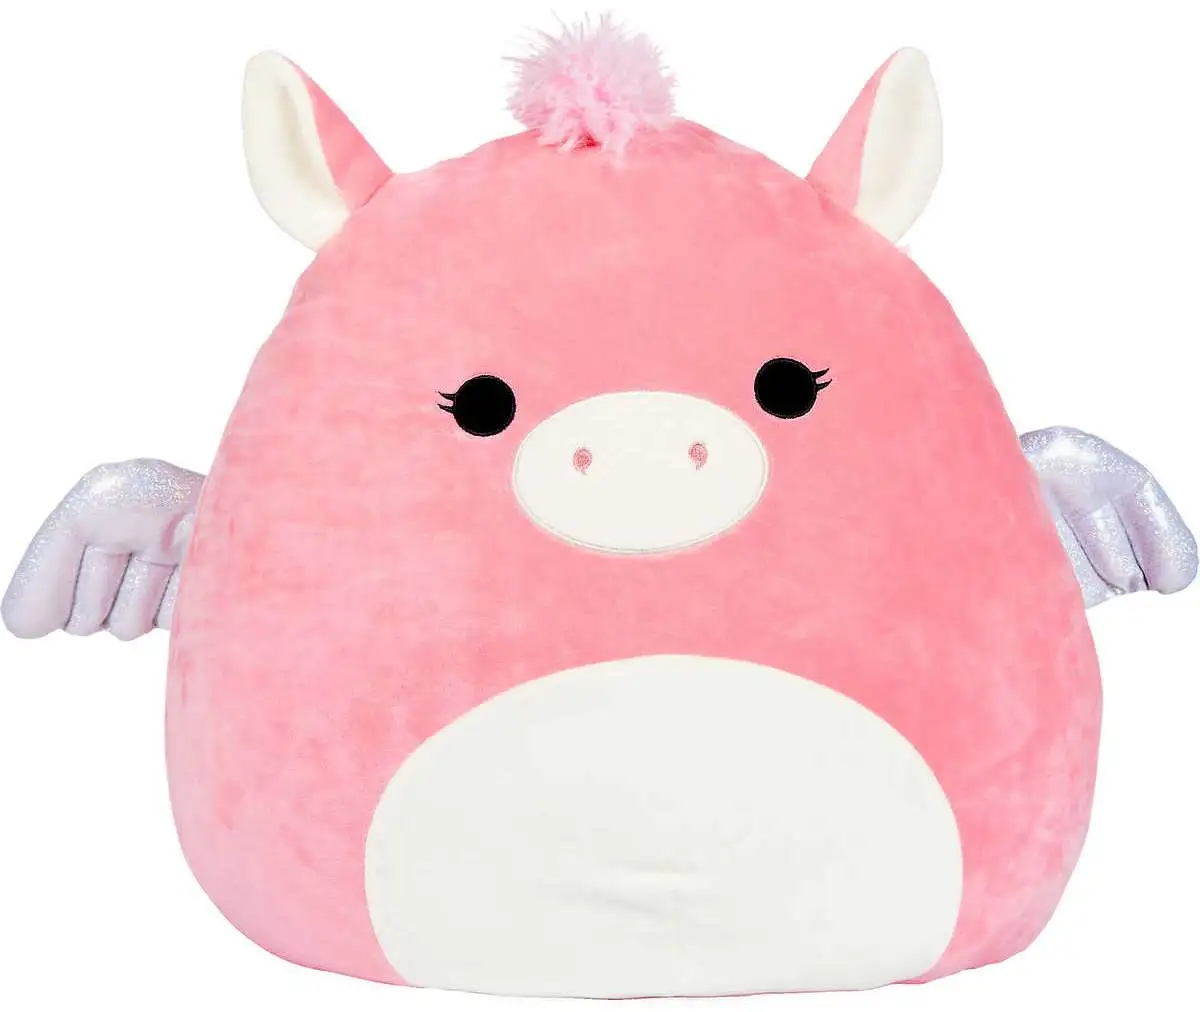 Squishmallows Paloma The Pegasus 16 inch Stuffed Animal Soft Plush Toy for sale online 